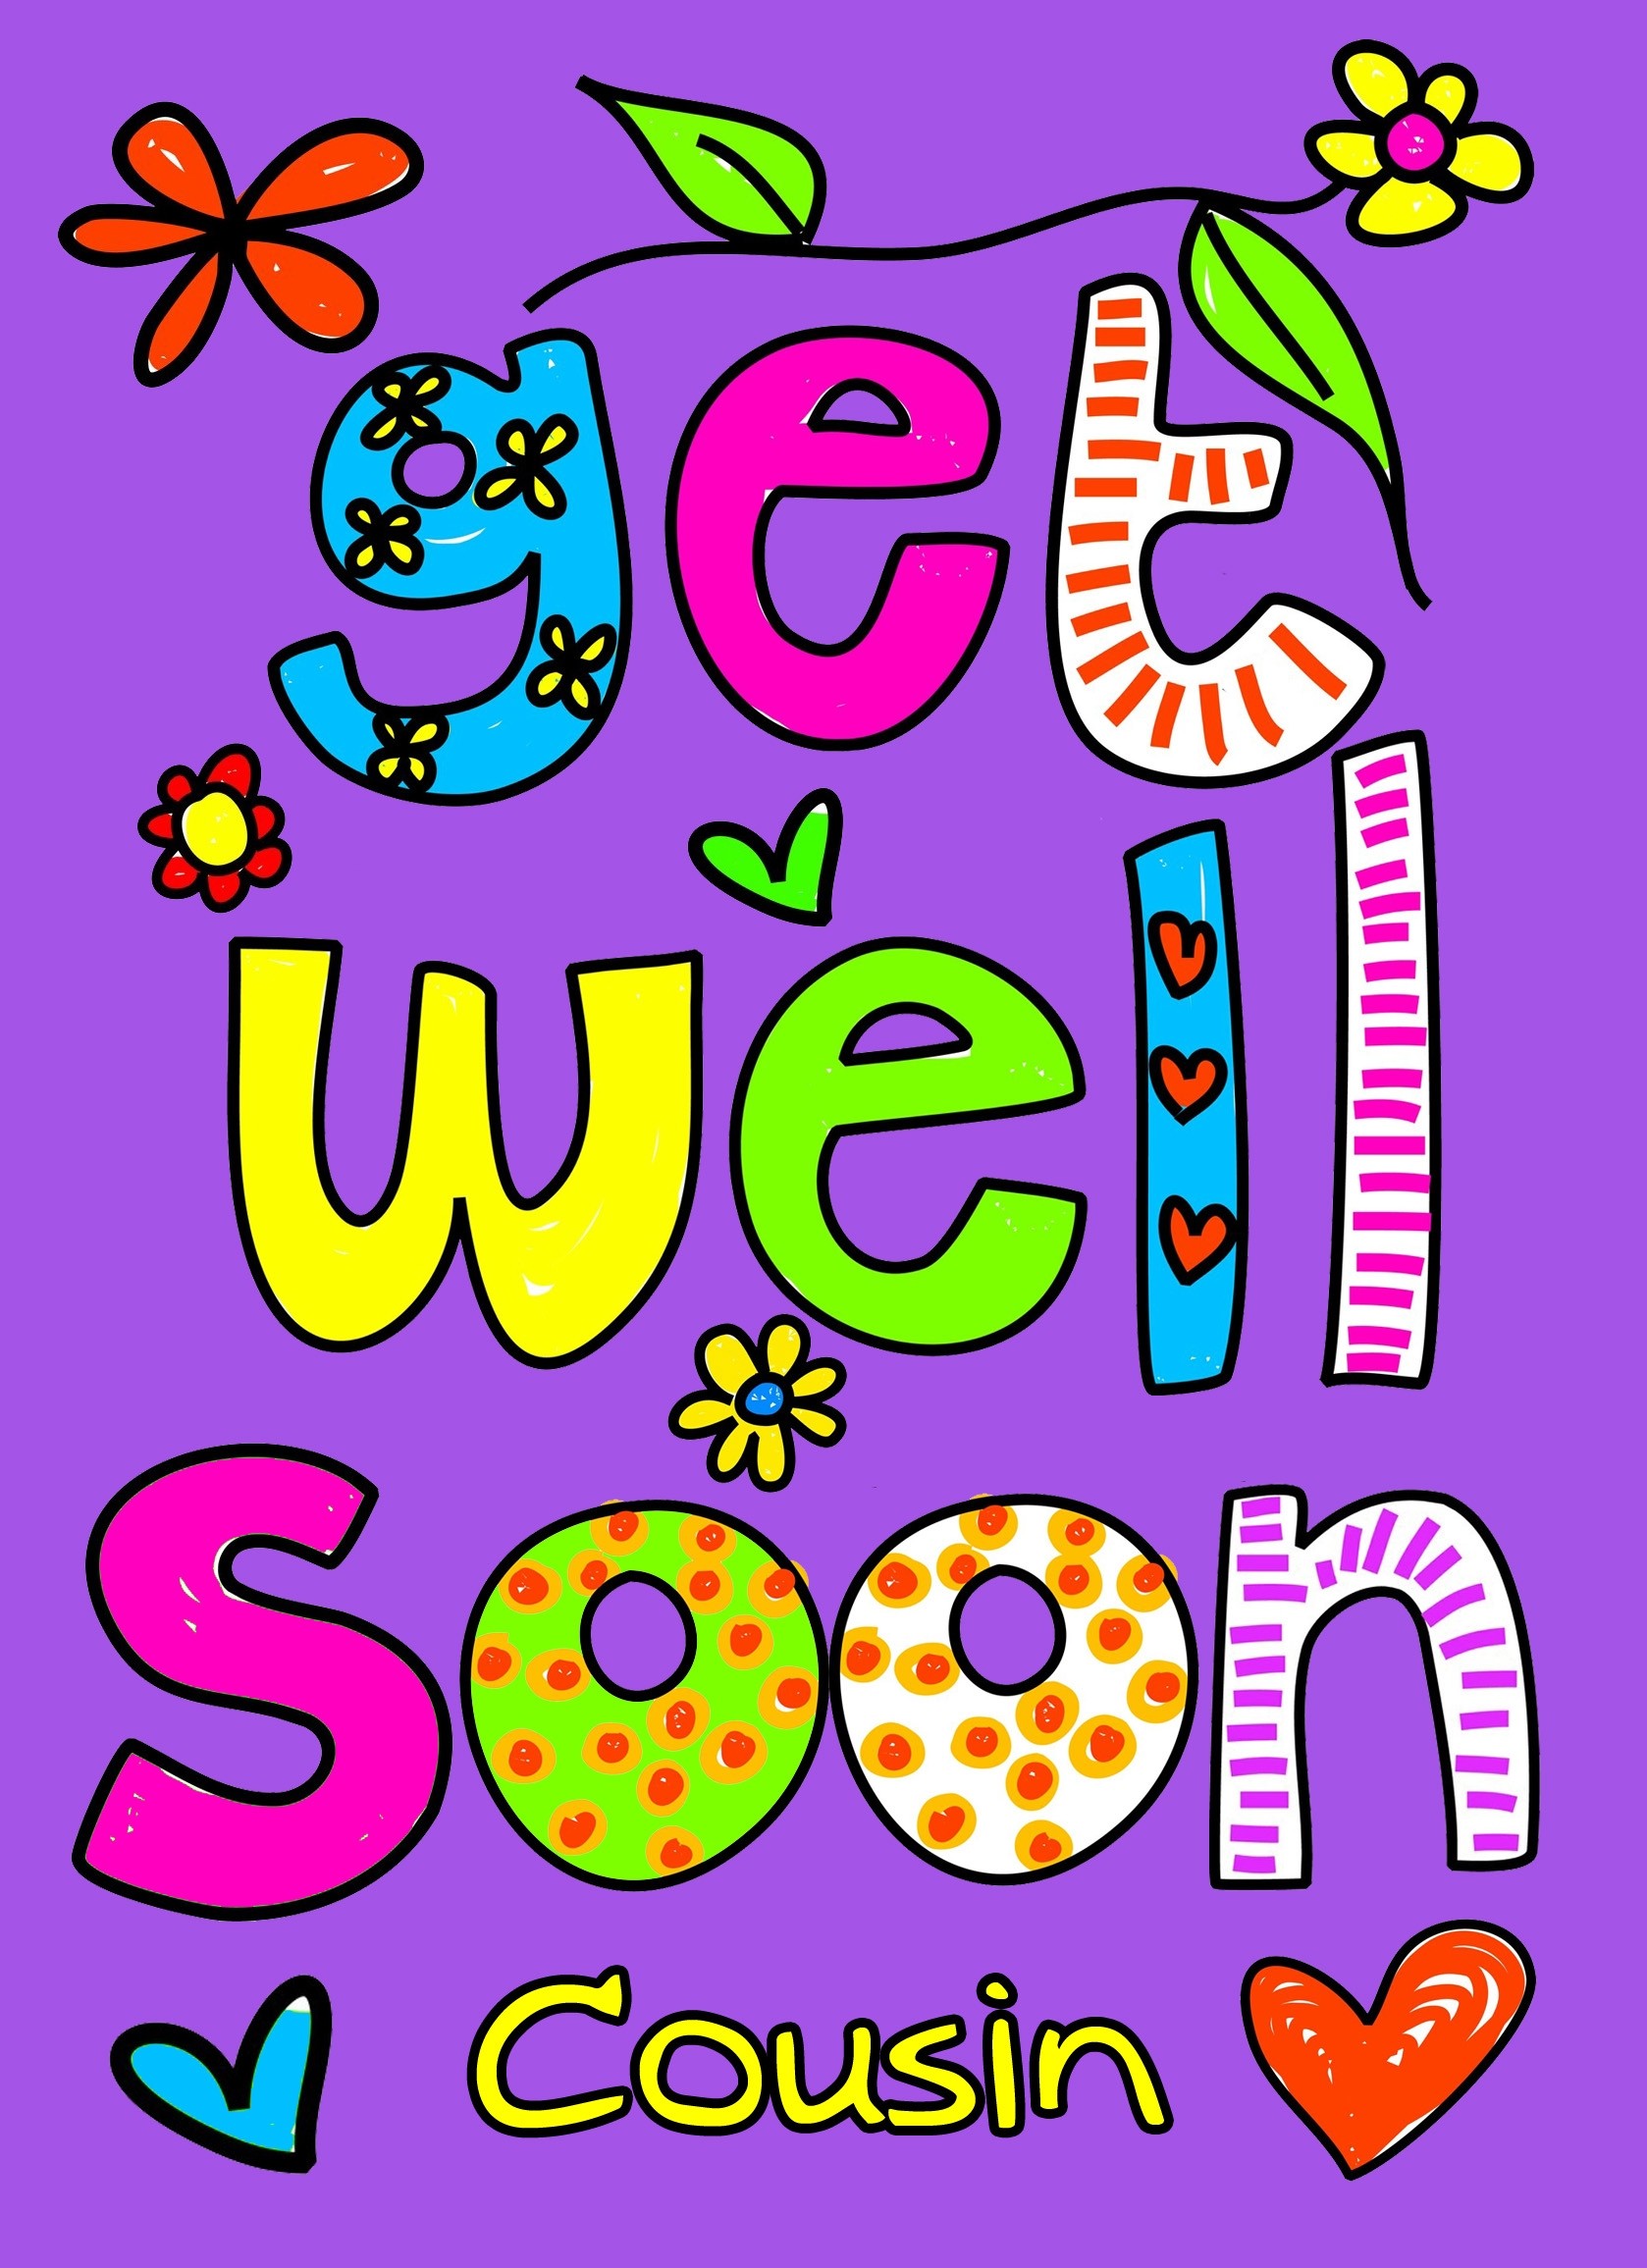 Get Well Soon 'Cousin' Greeting Card